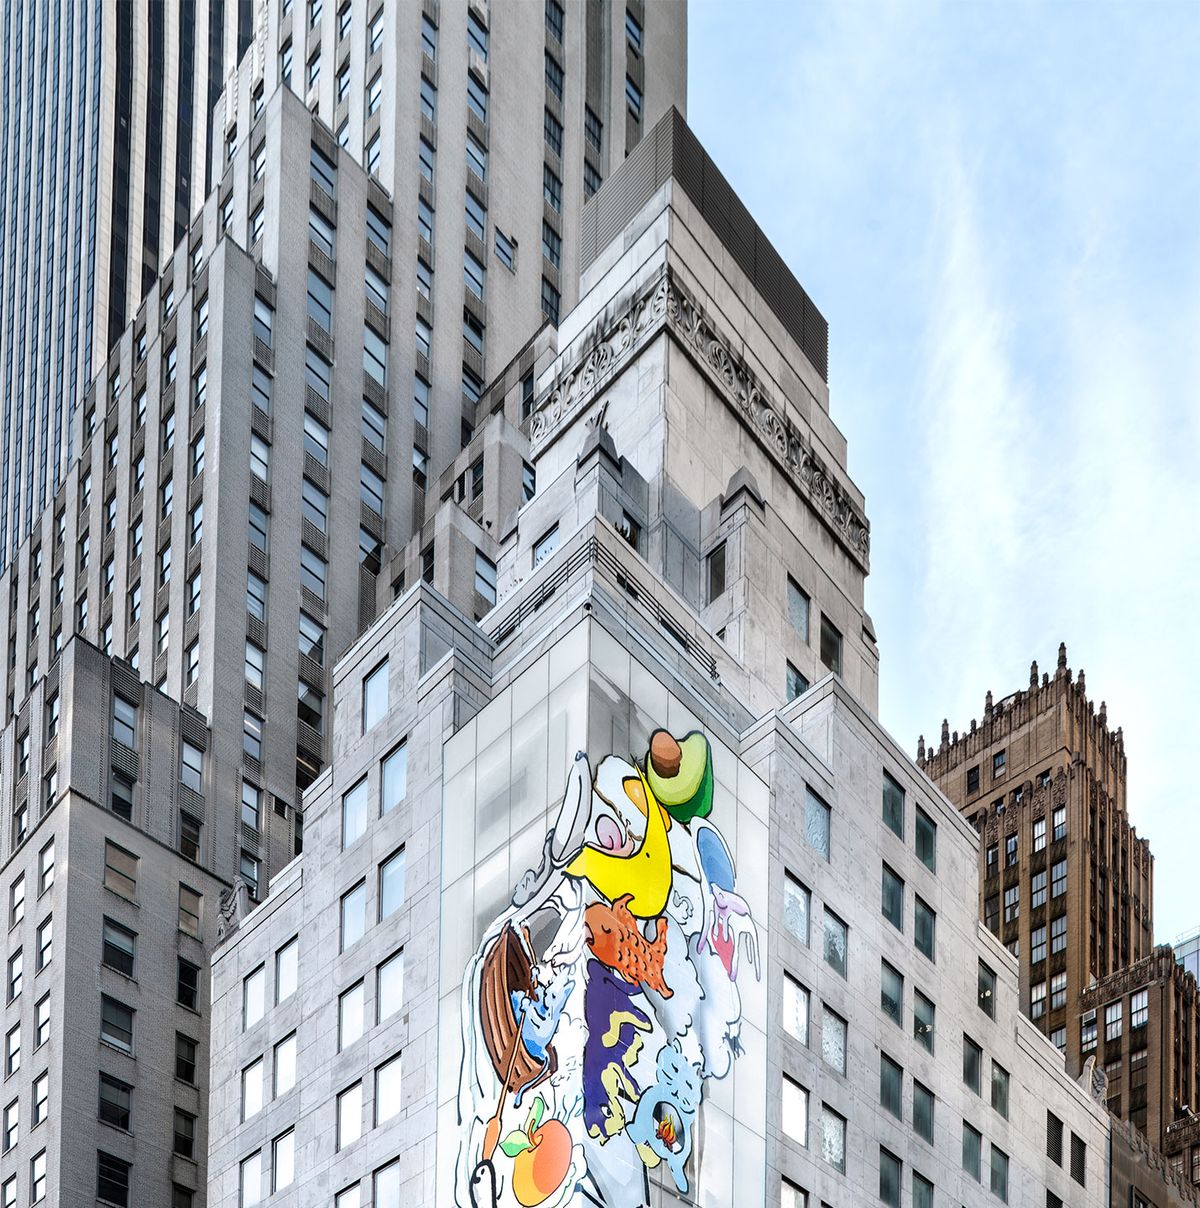 Louis Vuitton set to open new flagship on Fifth Avenue